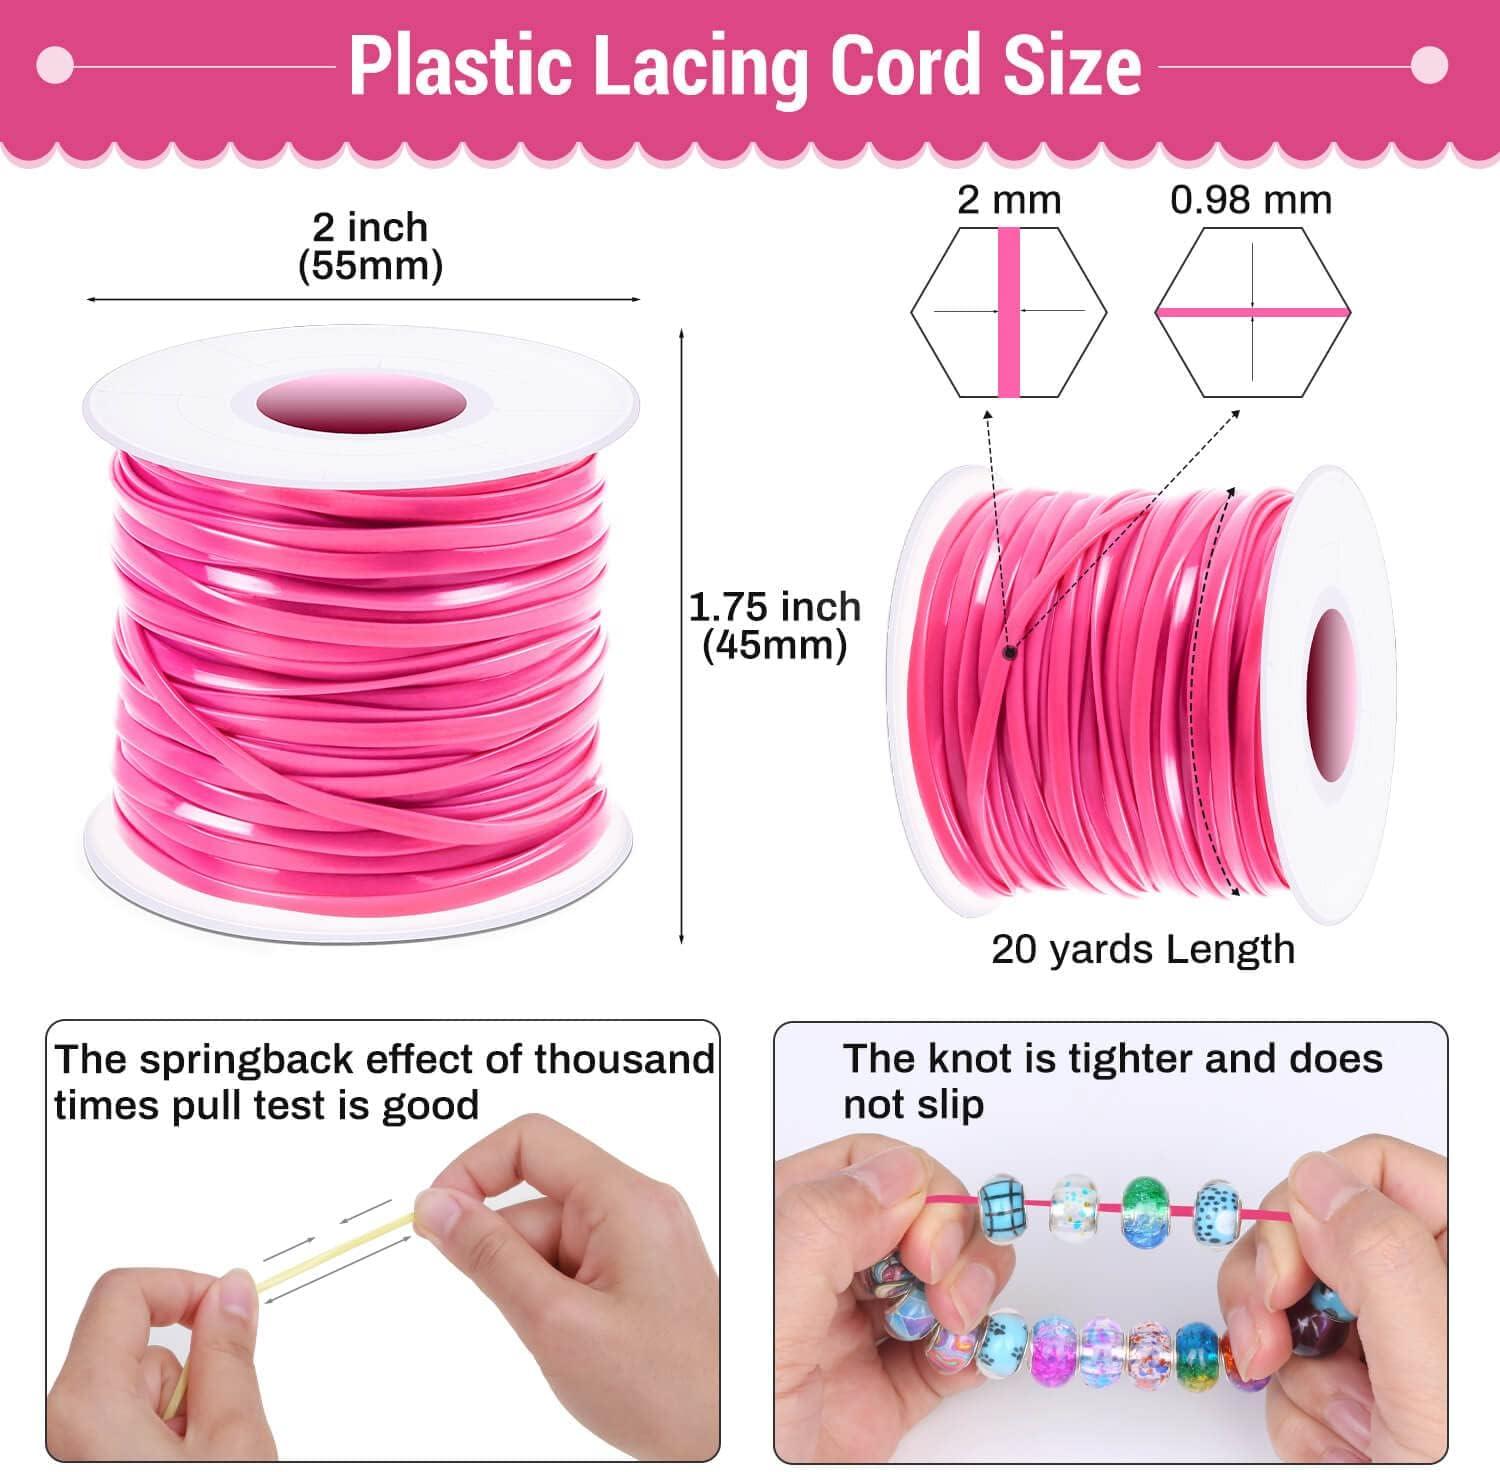 Cridoz Clear Elastic String for Bracelet Making with UK